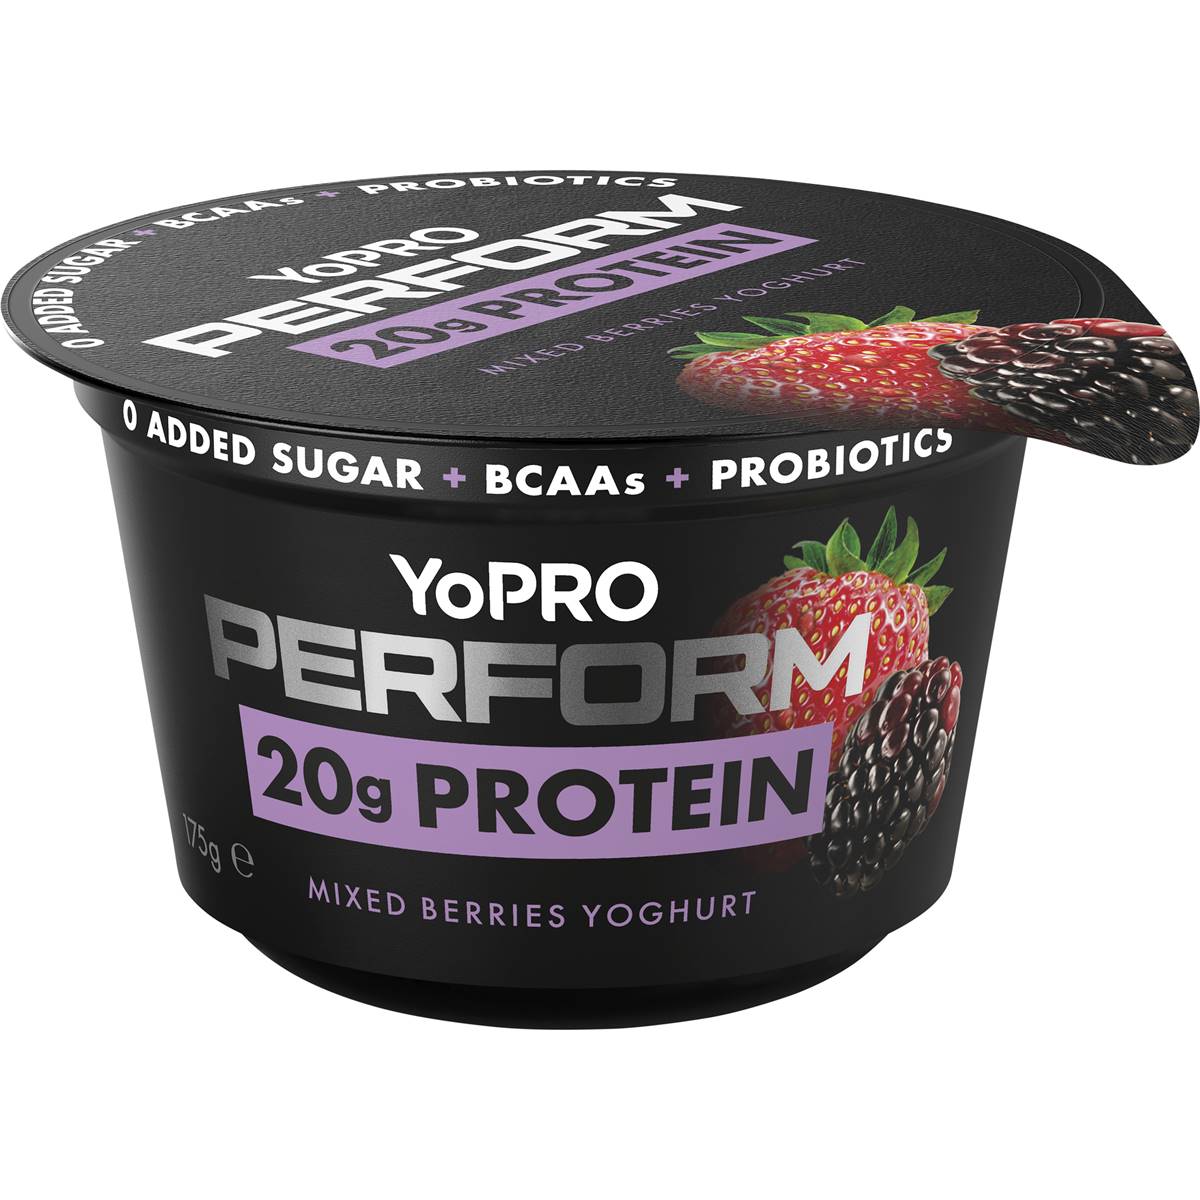 Calories in Yopro Perform Mixed Berries High Protein Yoghurt